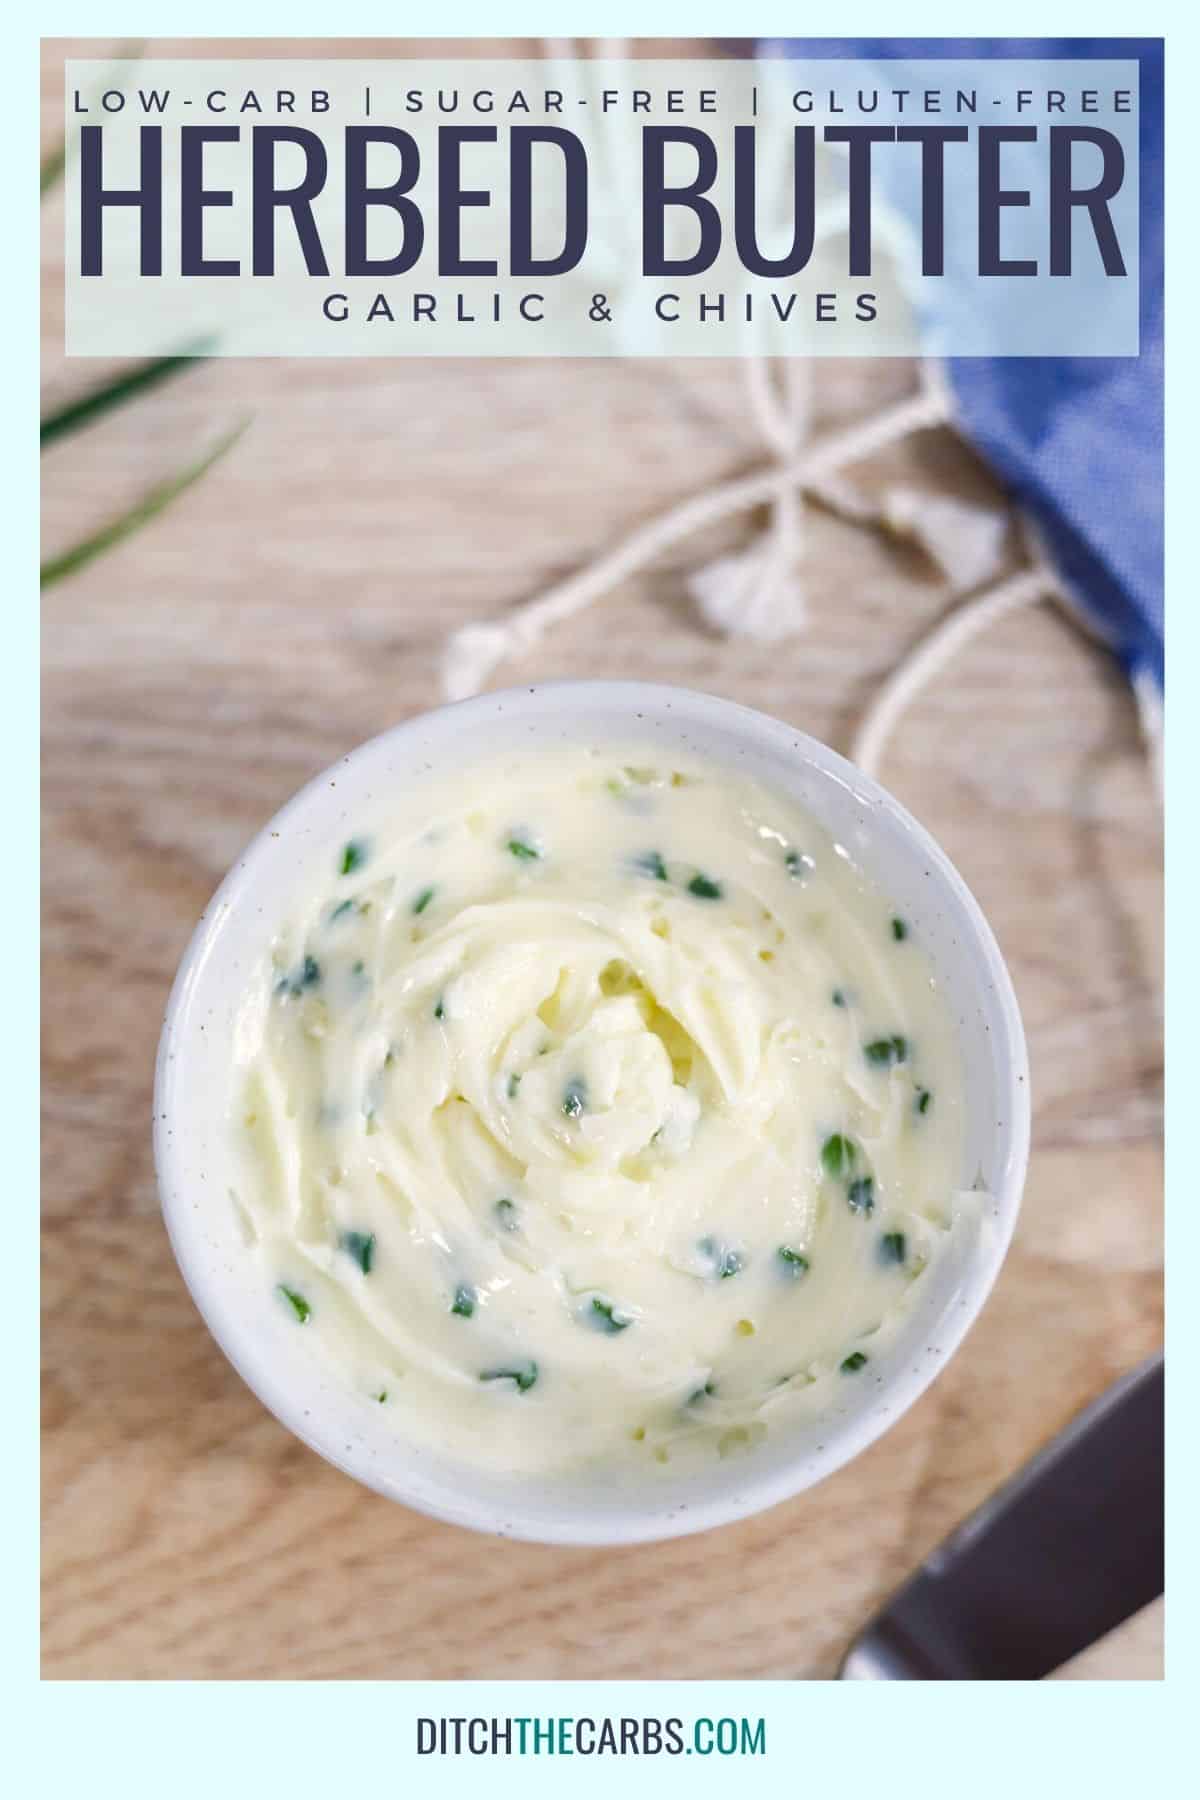 herbed butter recipe in a small white pot